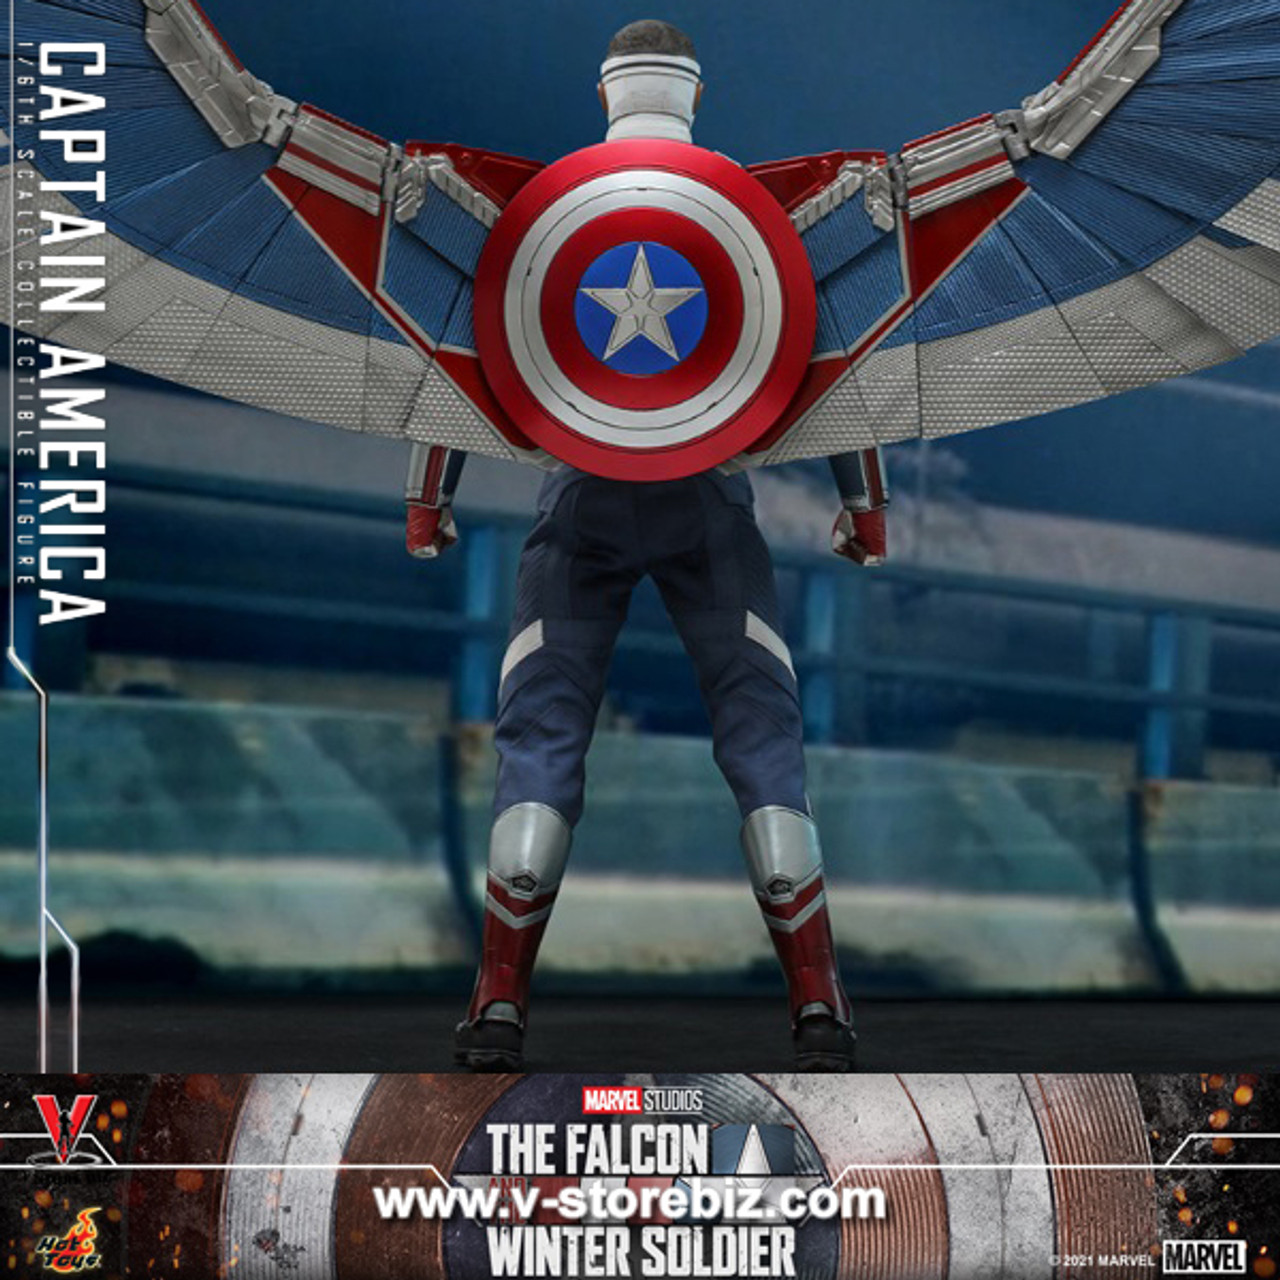 Captain America 1/6 Scale Figure by Hot Toys